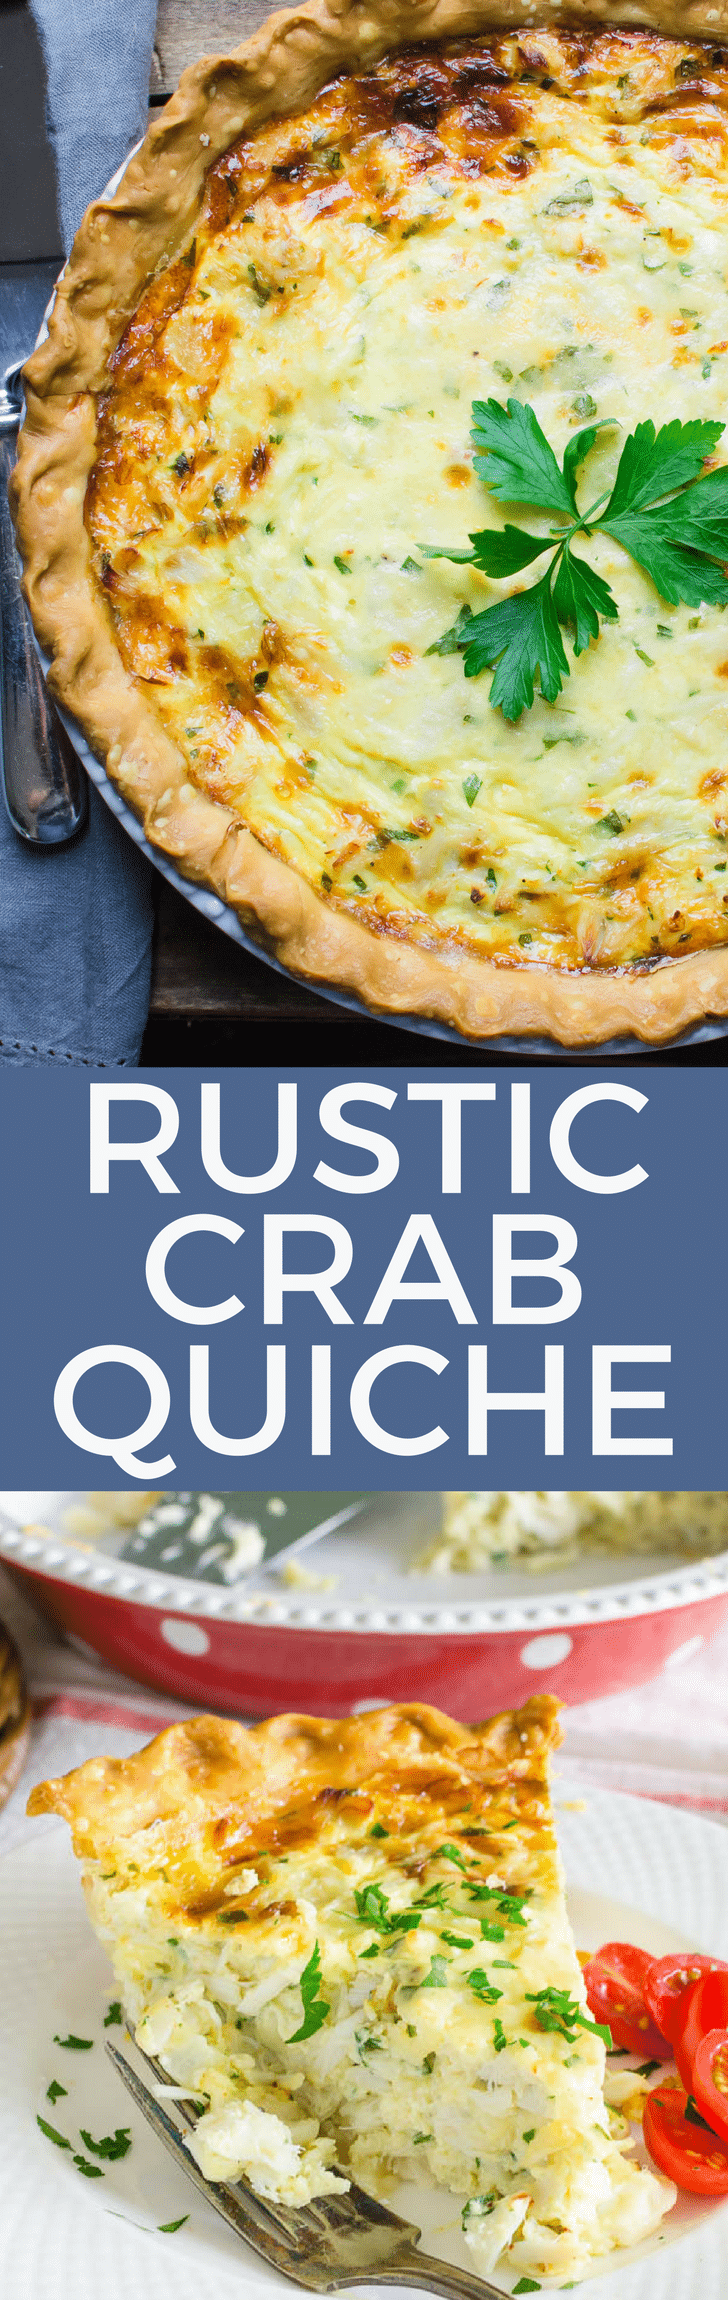 Rustic Crab Quiche is an easy seafood quiche recipe with a pound of lump crabmeat. This easy quiche recipe is great for a special brunch or lunch. #quiche #seafoodquiche #crabquiche #brunchrecipe #lunchrecipe #crab #seafood #pescatarian #brunch #lunch #howtomakequiche #easiestquicherecipe #easyquiche #eggs #pastry #makeahead #makeaheadbrunch #makeaheadlunch